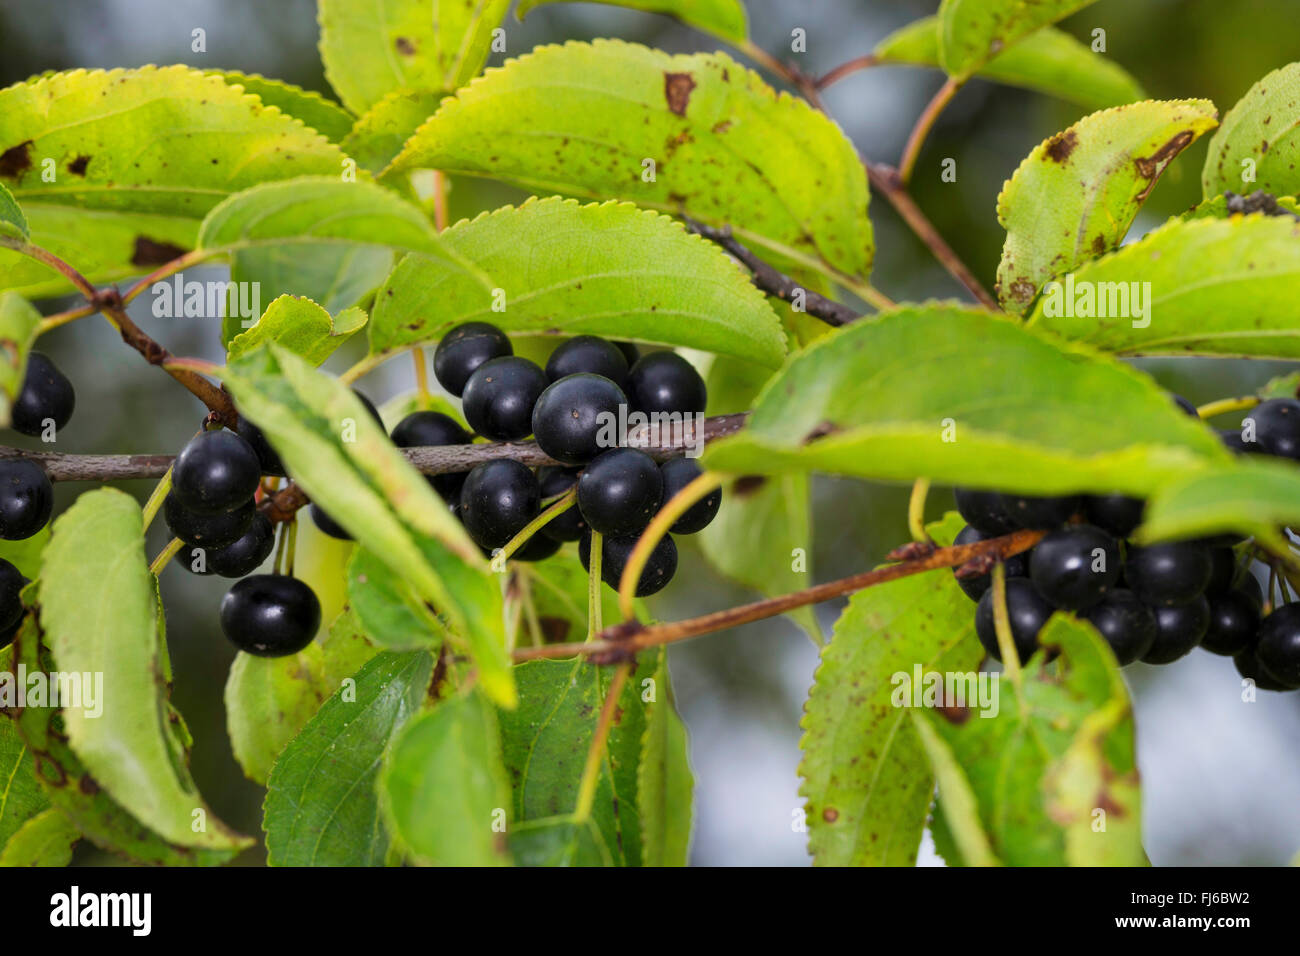 common buckthorn (Rhamnus catharticus), fruit on a branch, Germany Stock Photo